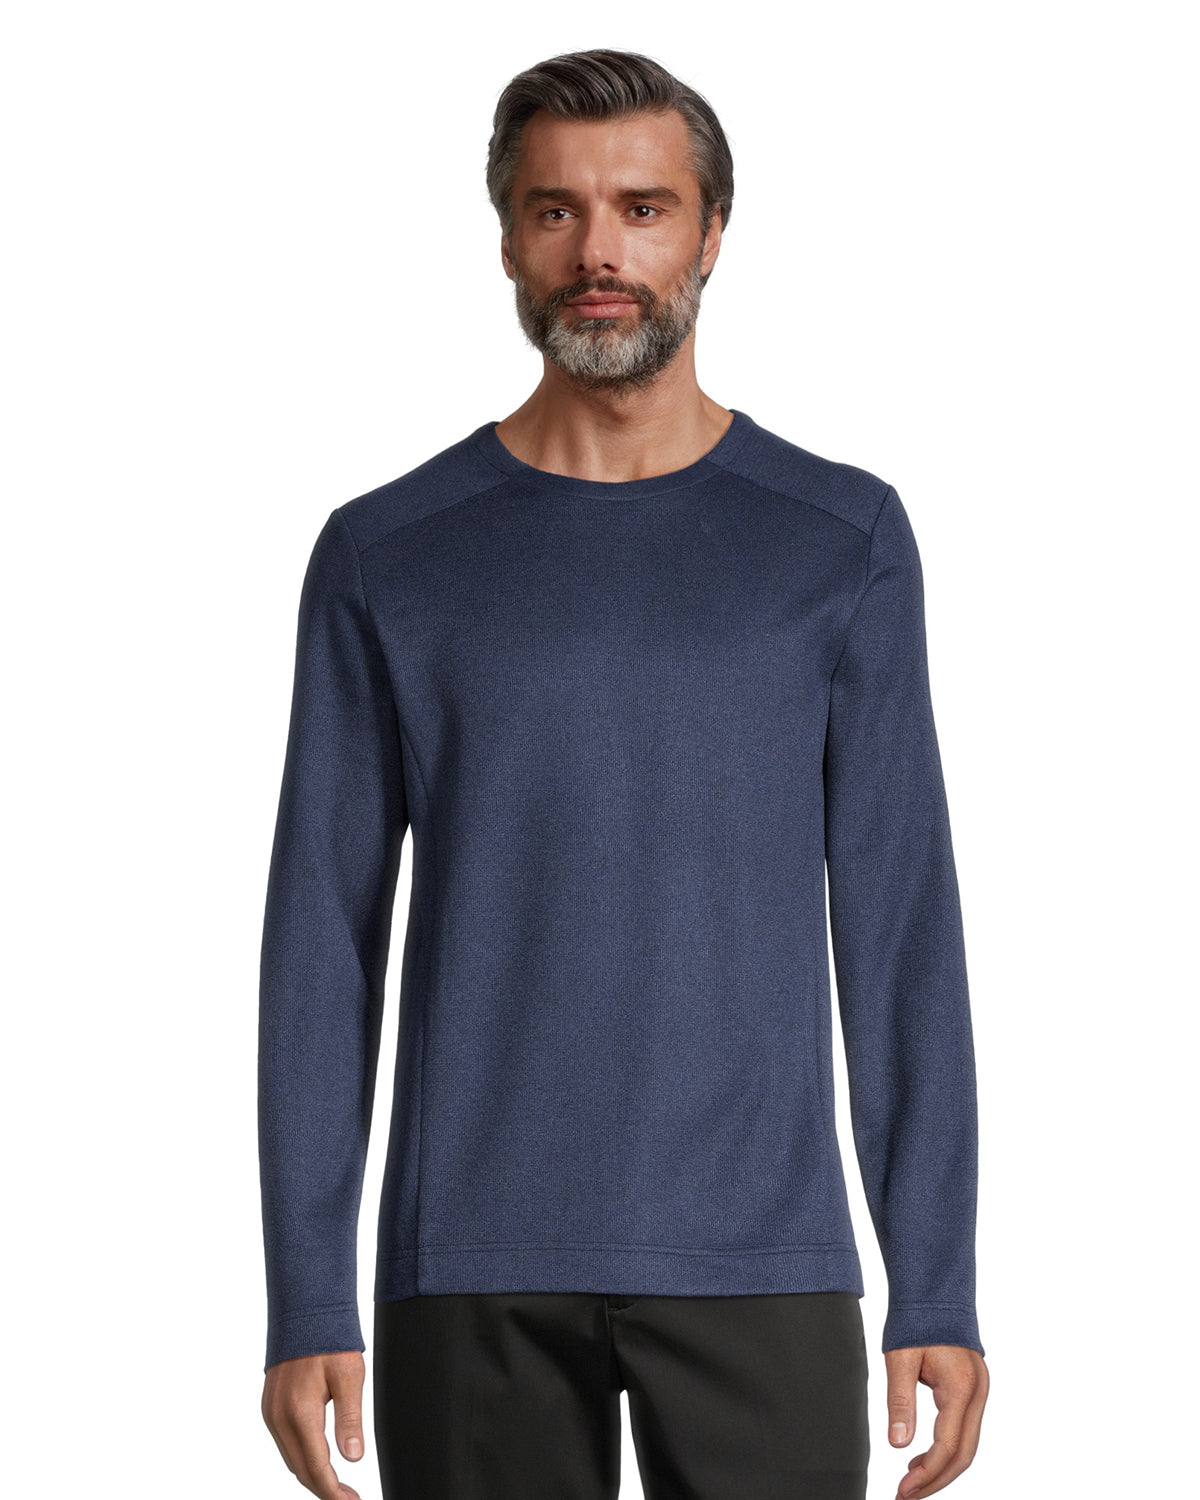 Evolve Men's Double Knit Pullover Sweater